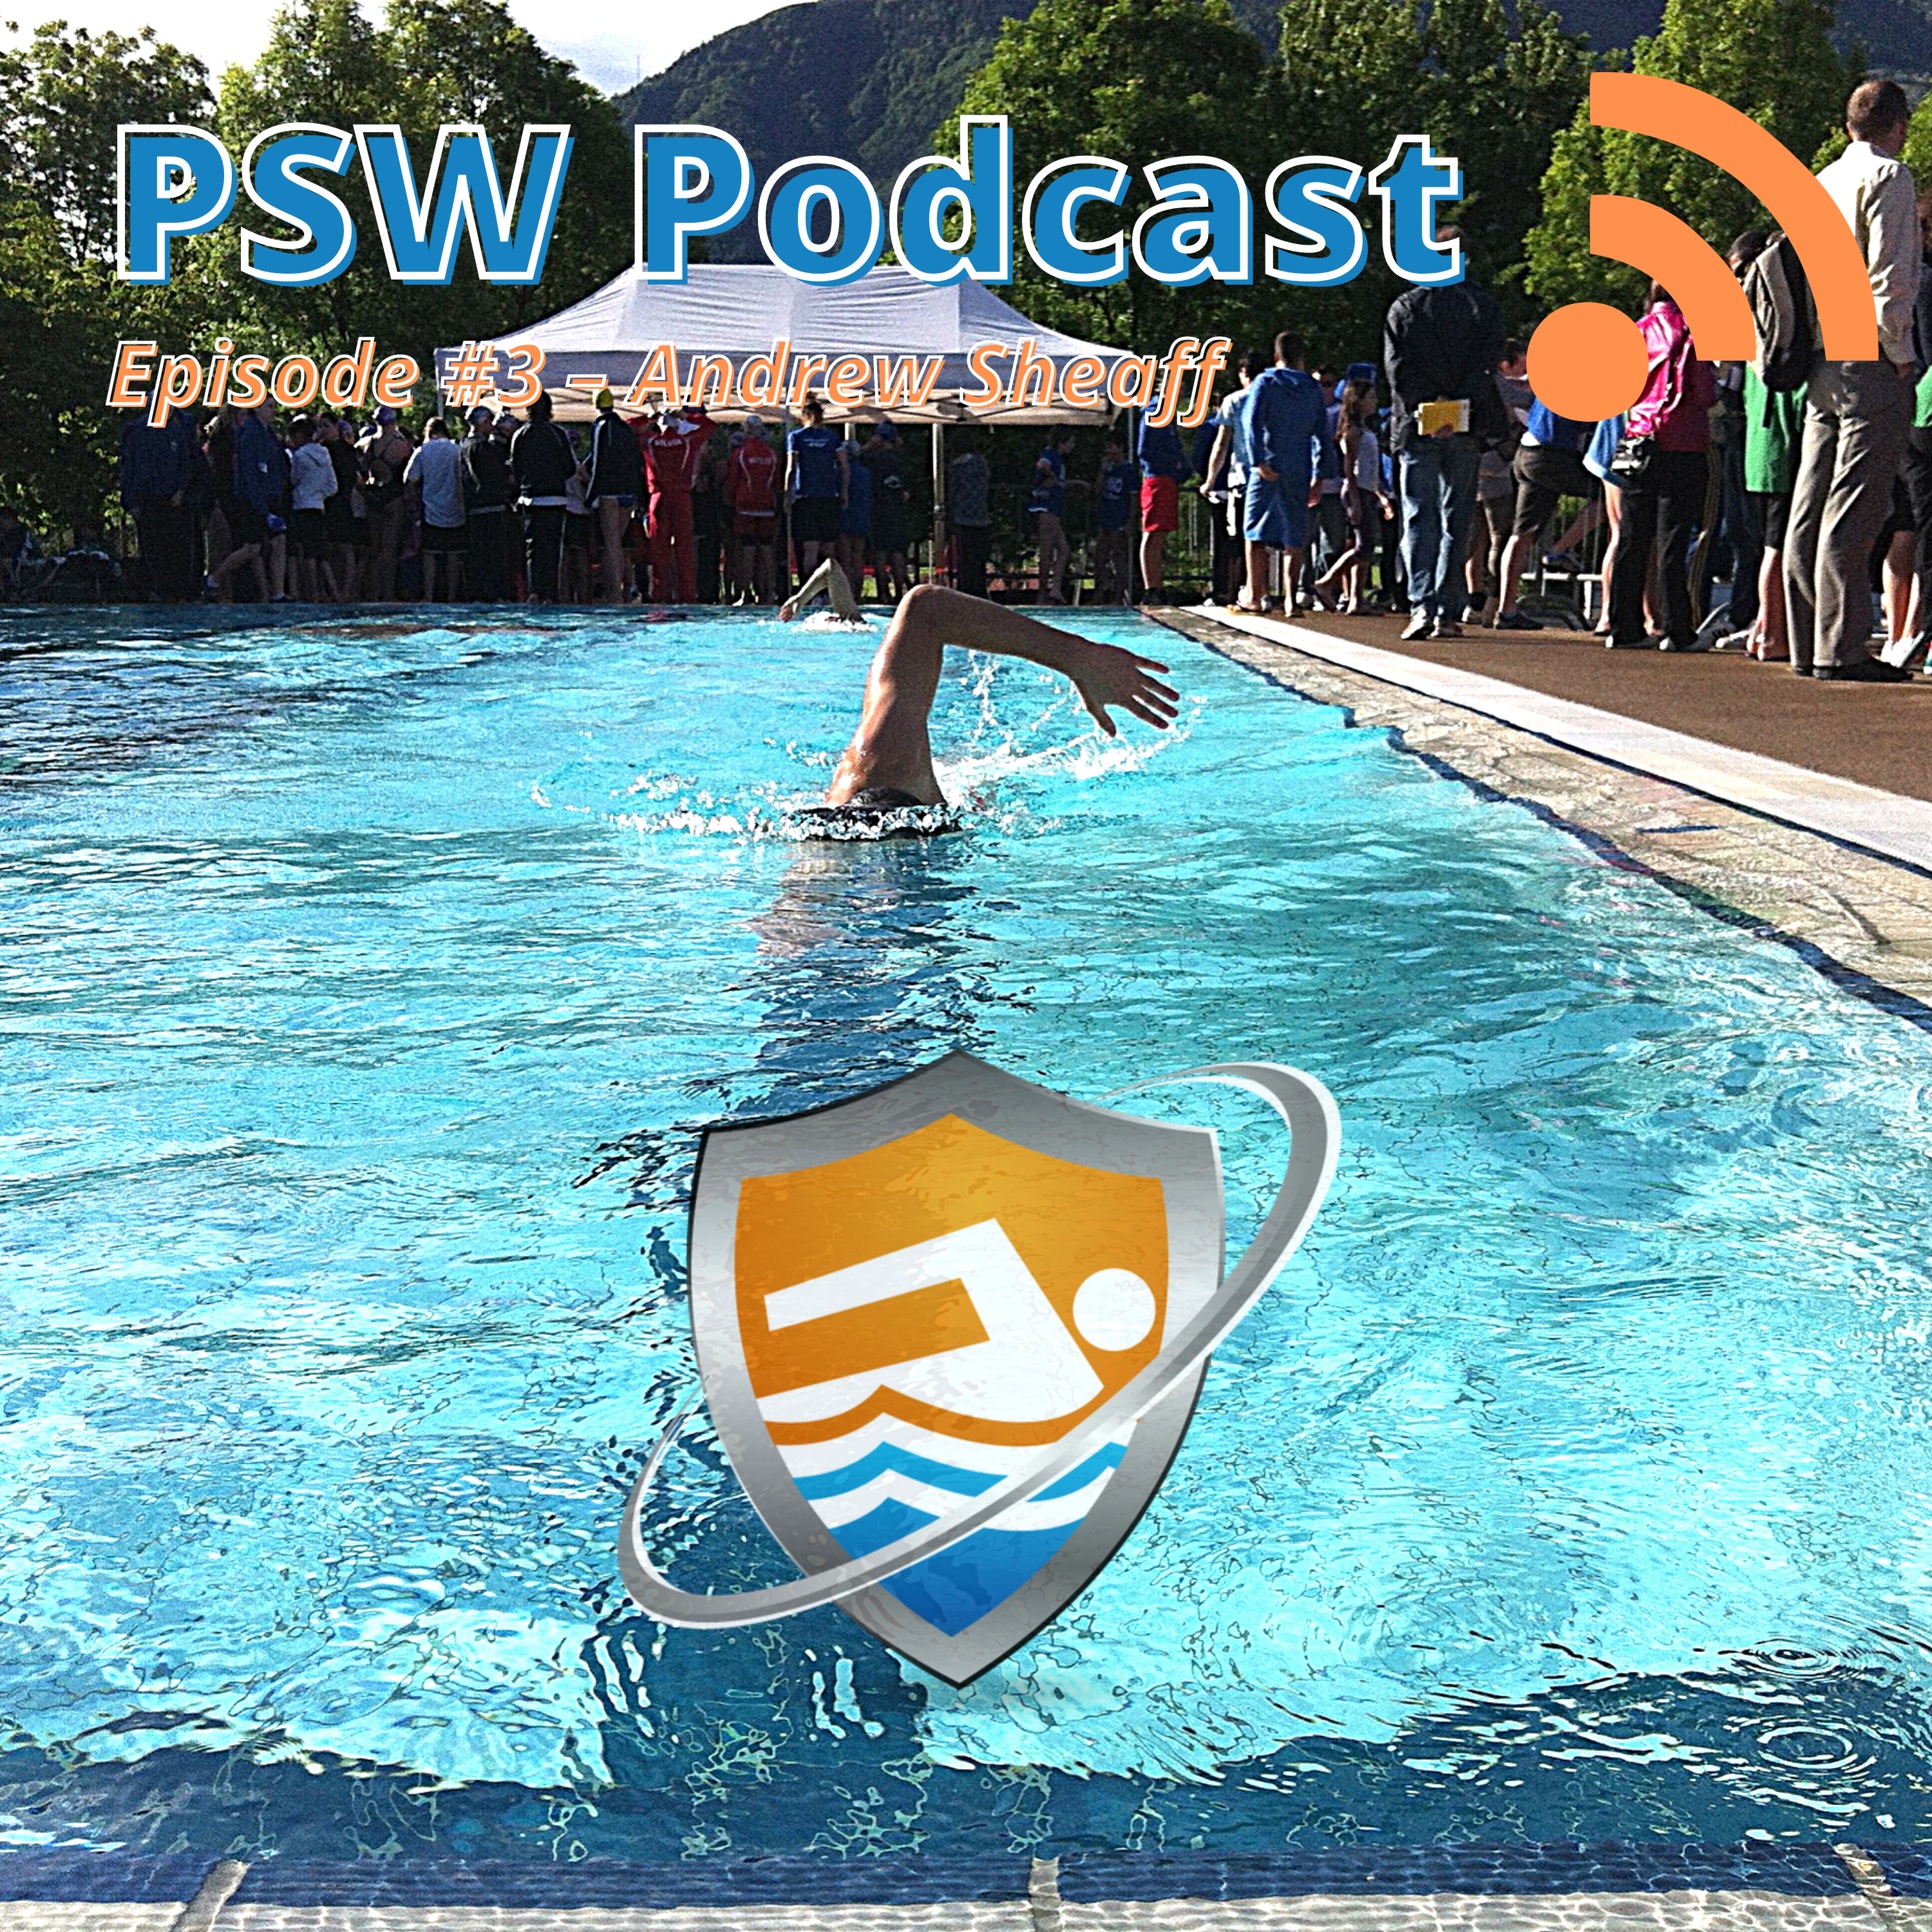 PSW Podcast – Episode 3 – Andrew Sheaff - Part 1